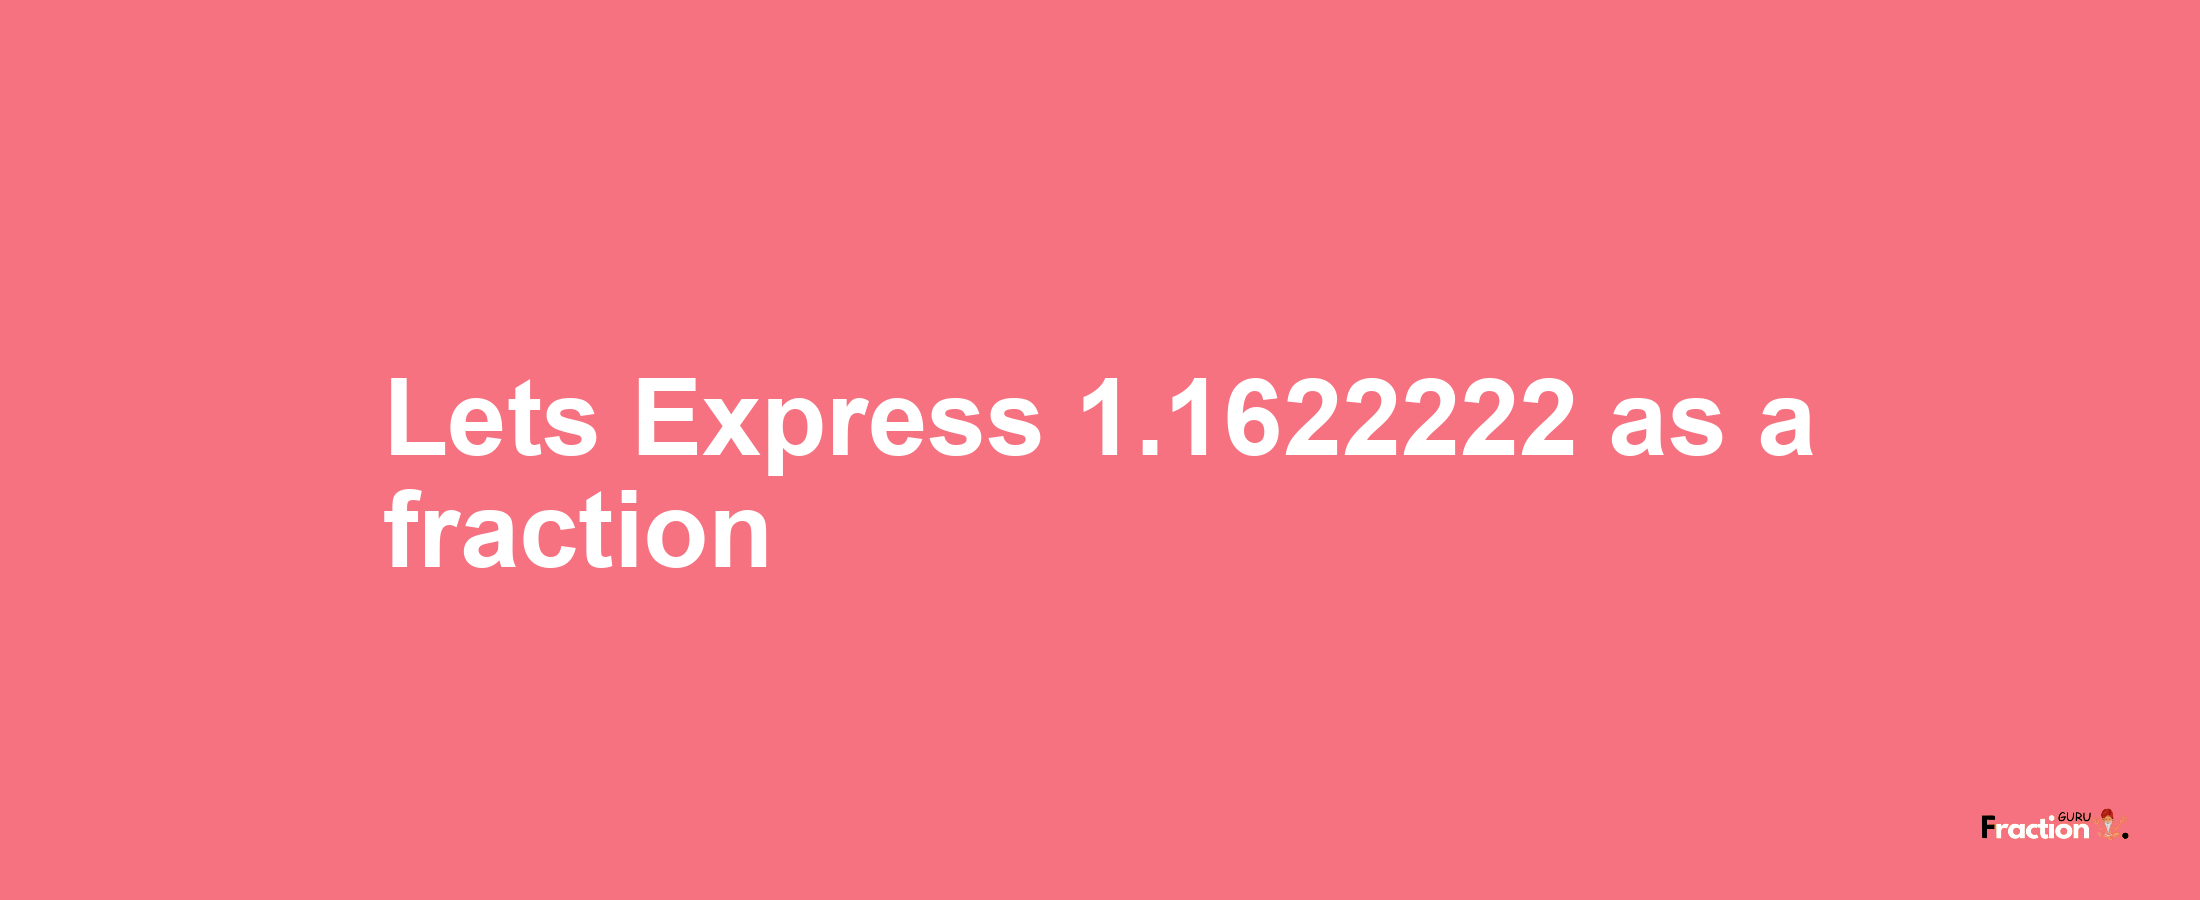 Lets Express 1.1622222 as afraction